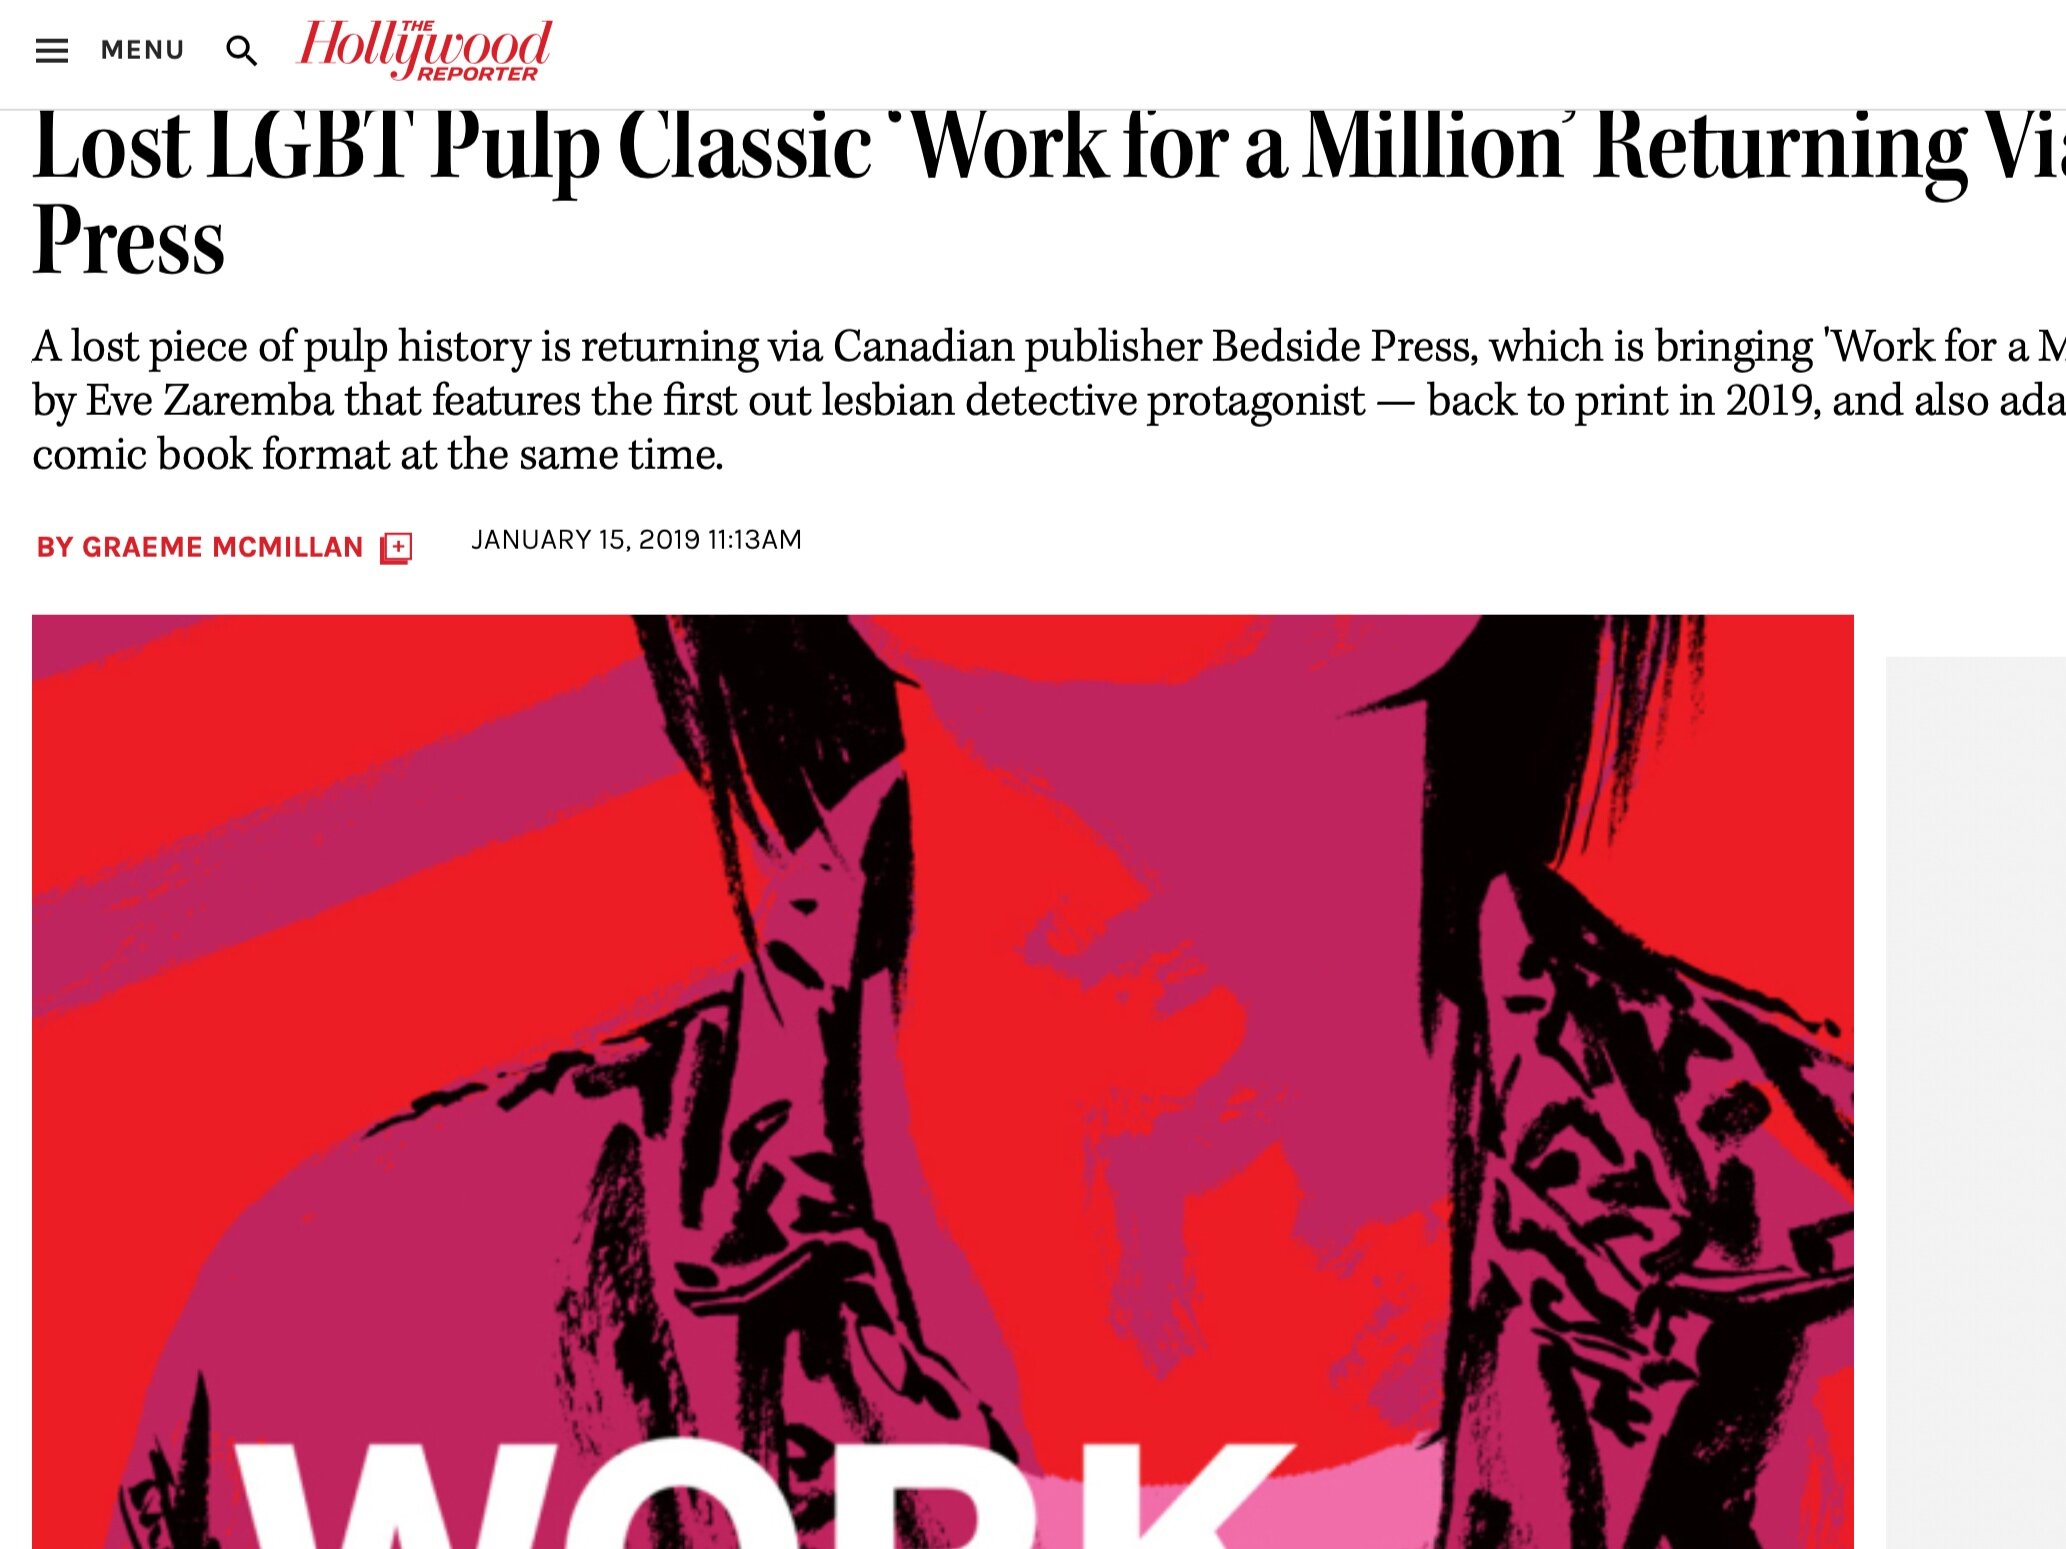 THE HOLLYWOOD REPORTER: Lost LGBT Pulp Classic "Work for a Million" Returning